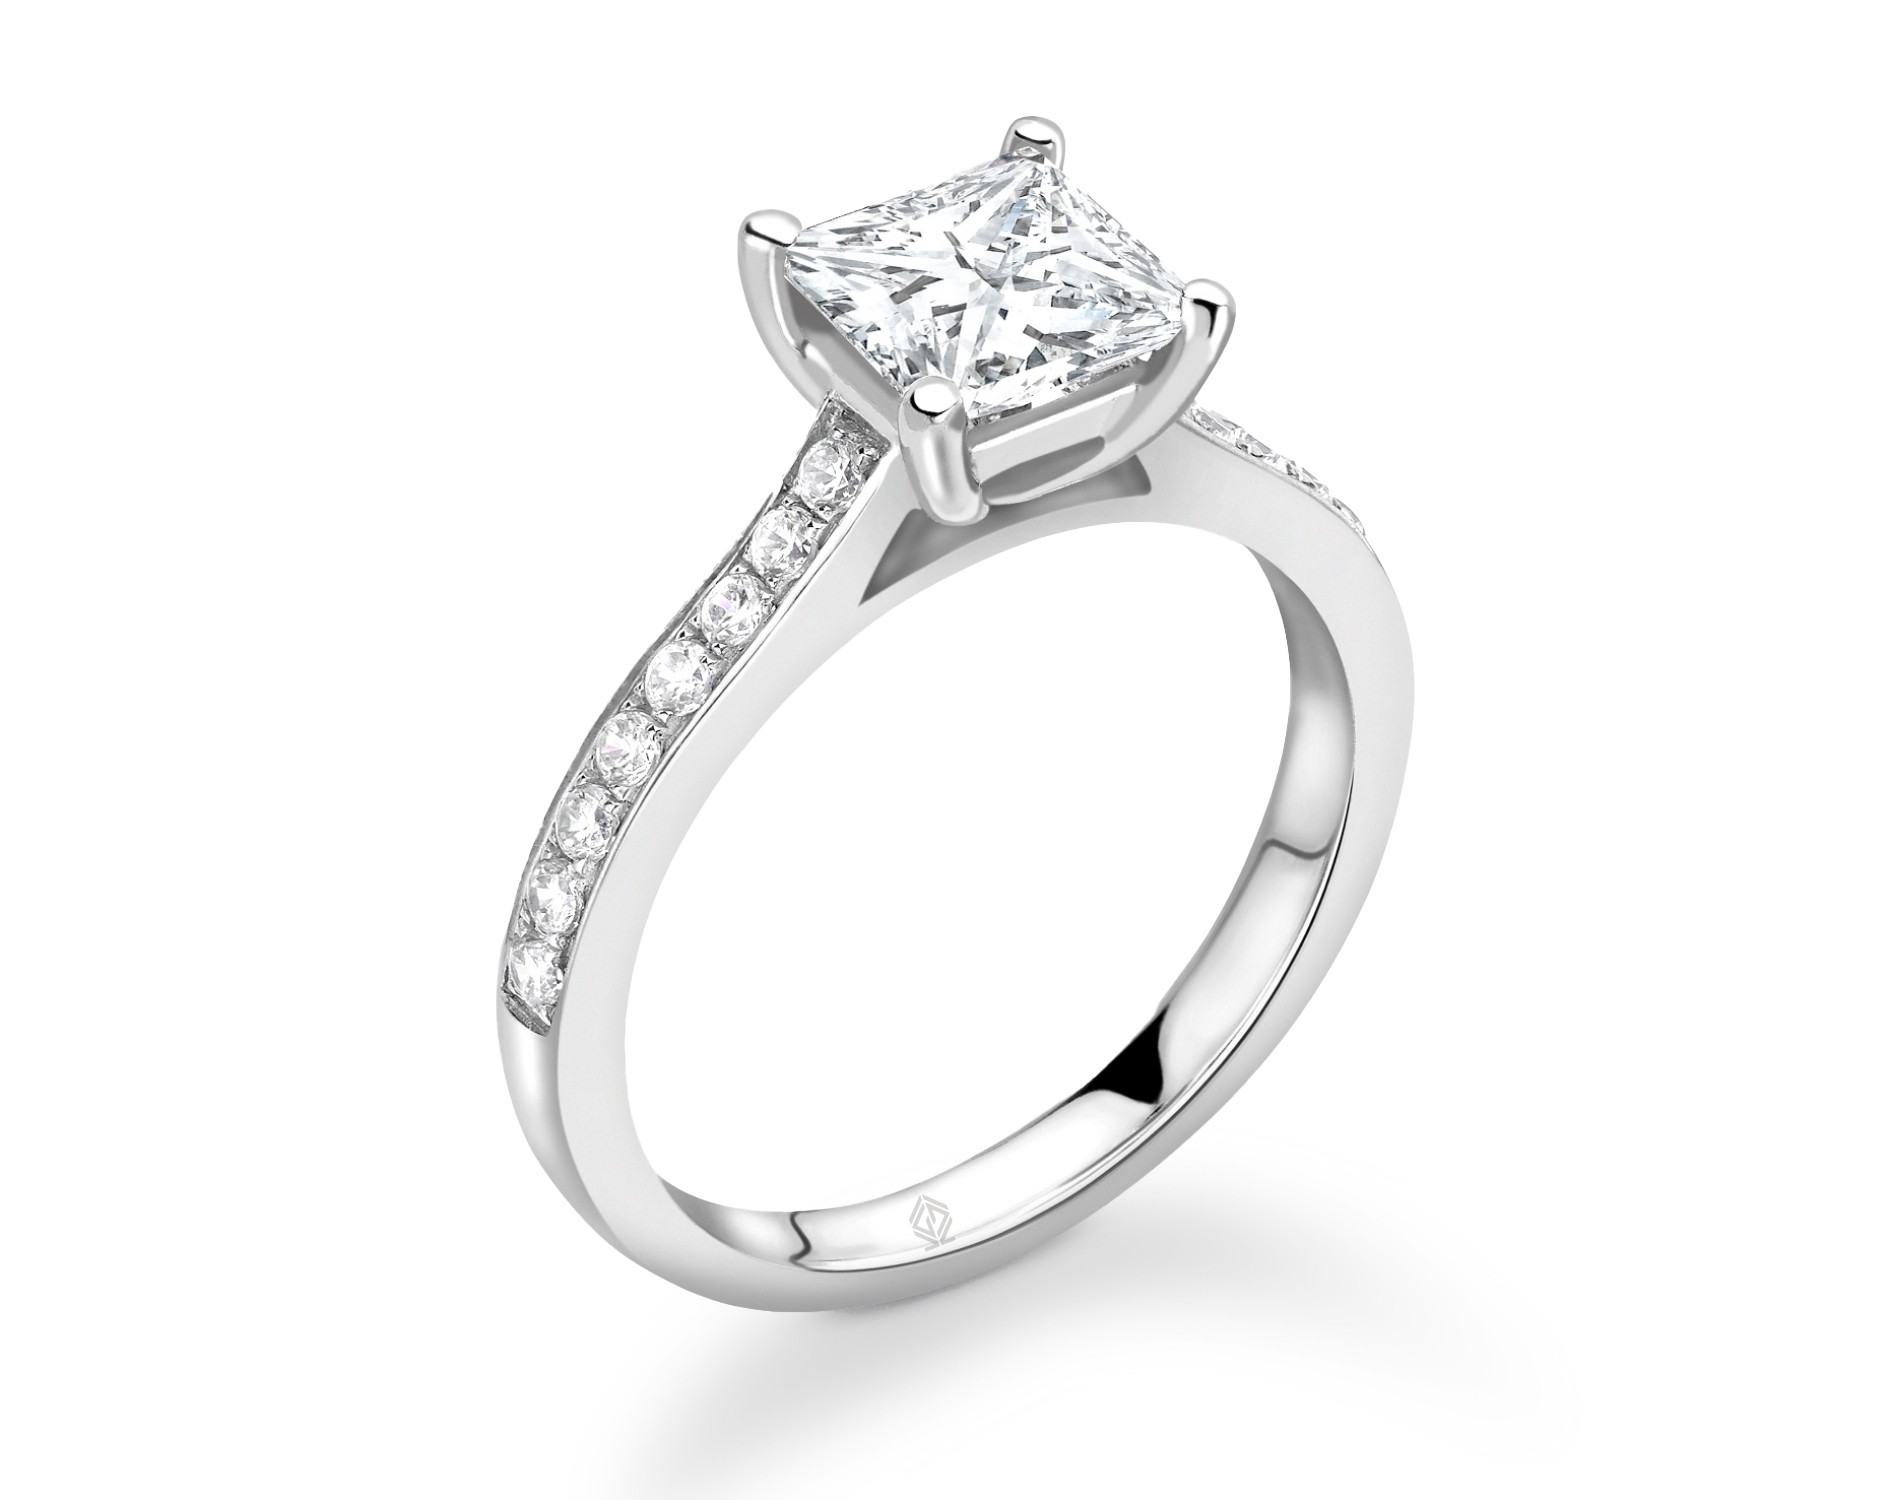 18K WHITE GOLD PRINCESS CUT 4 PRONGS DIAMOND ENGAGEMENT RING WITH SIDE STONES CHANNEL SET